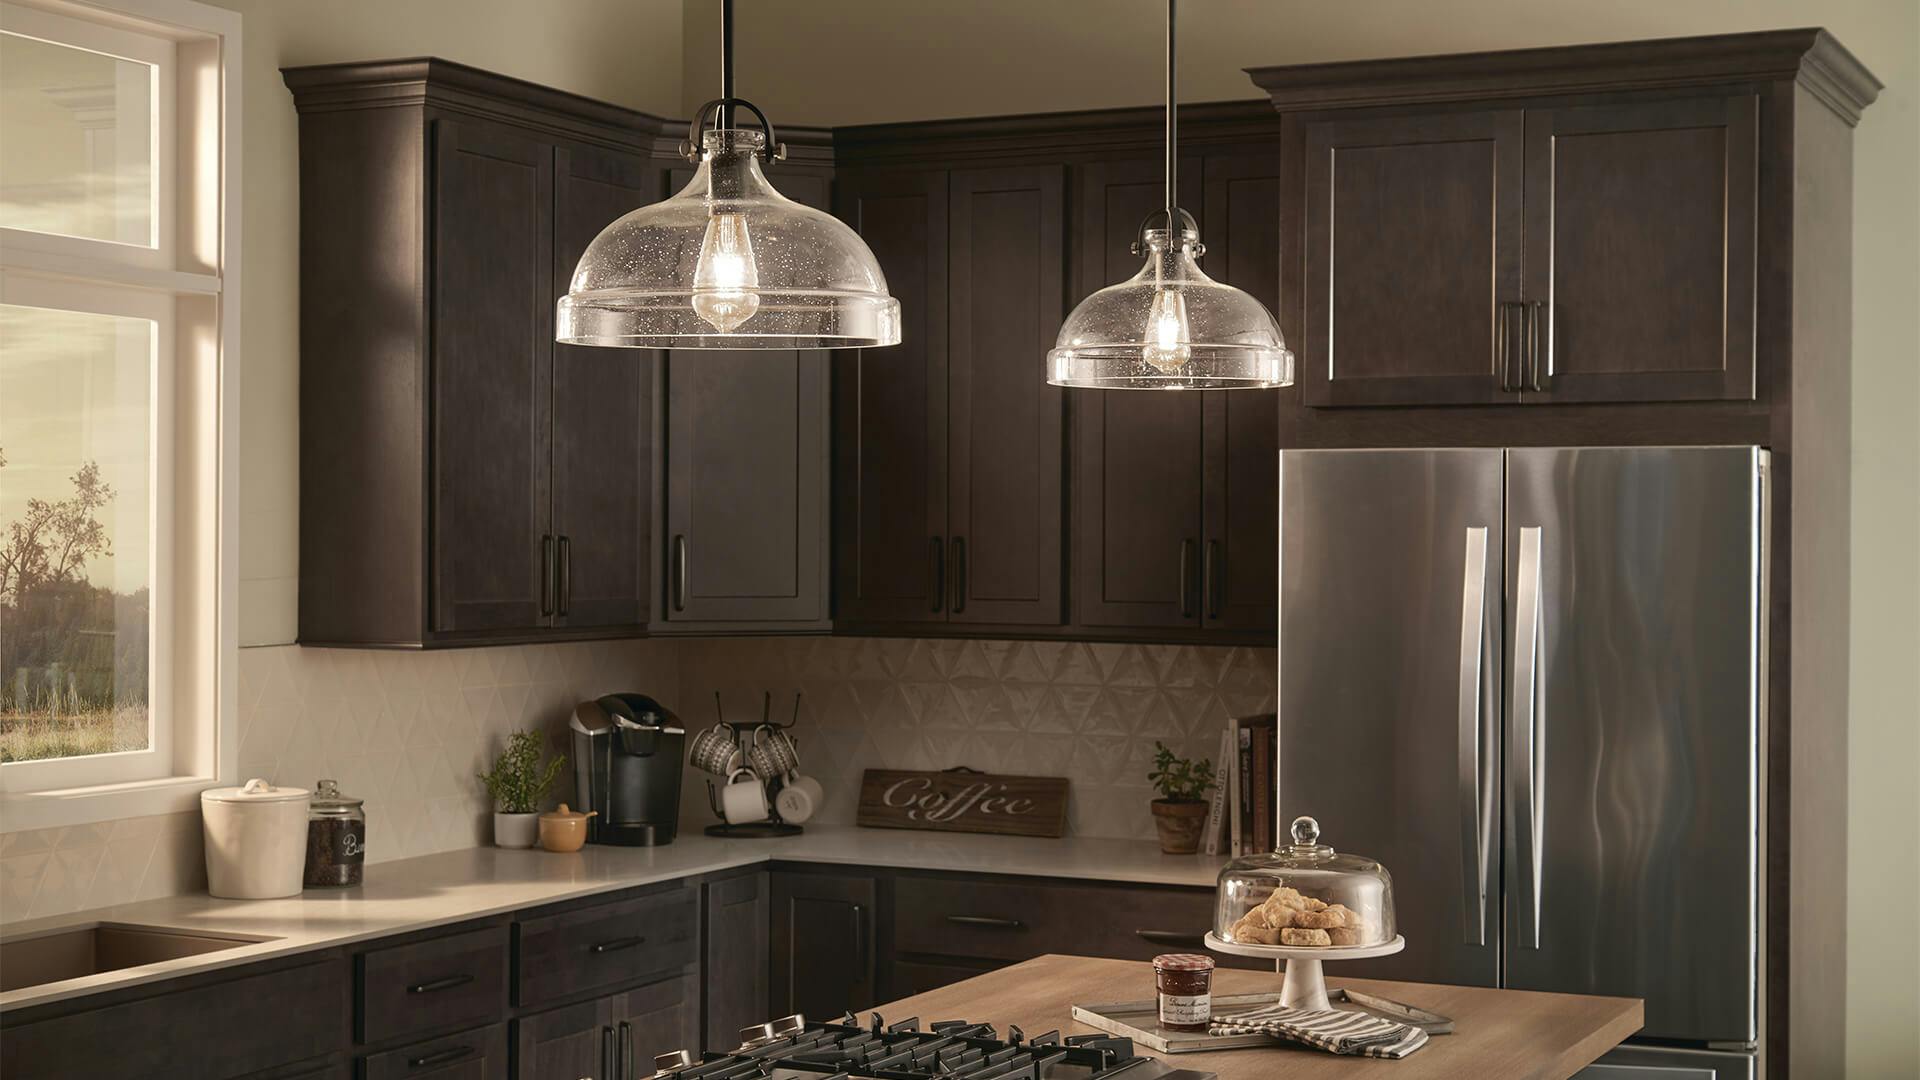 A kitchen with two glass pendant lights turned on above a kitchen island during the day